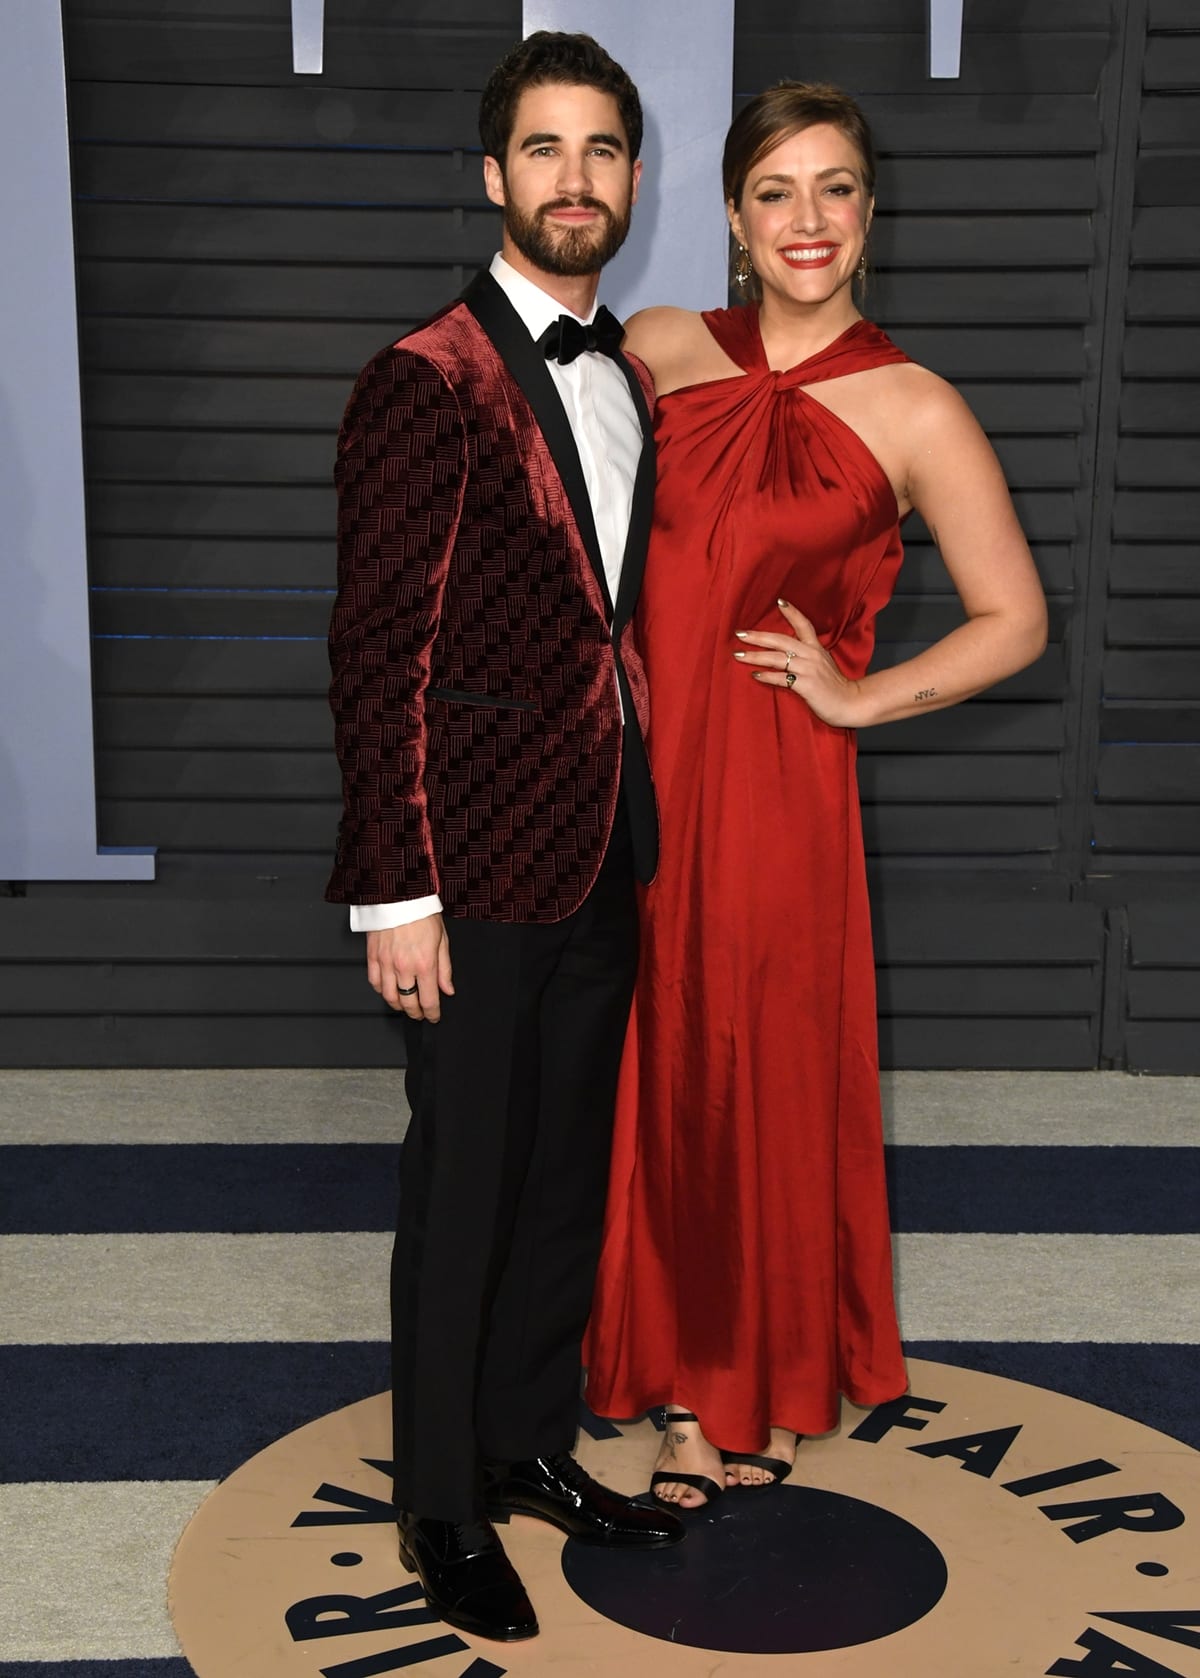 Wearing an Armani suit and Christian Louboutin shoes, Darren Criss and Mia Swier attended the 2018 Elton John AIDS Foundation’s Academy Awards Viewing Party